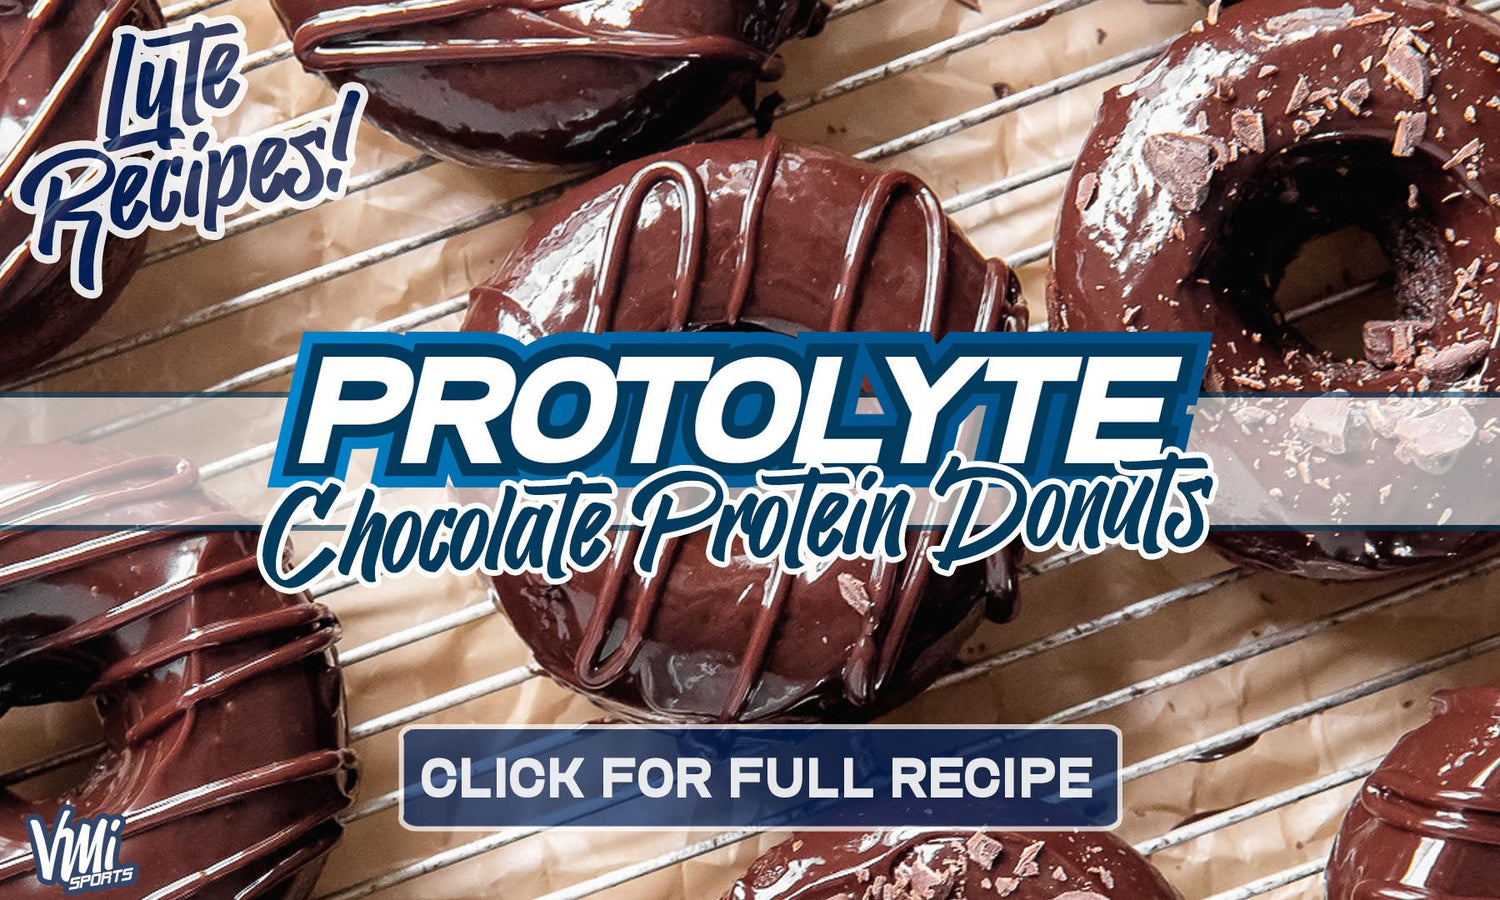 CHOCOLATE PROTEIN PROTOLYTE DONUTS